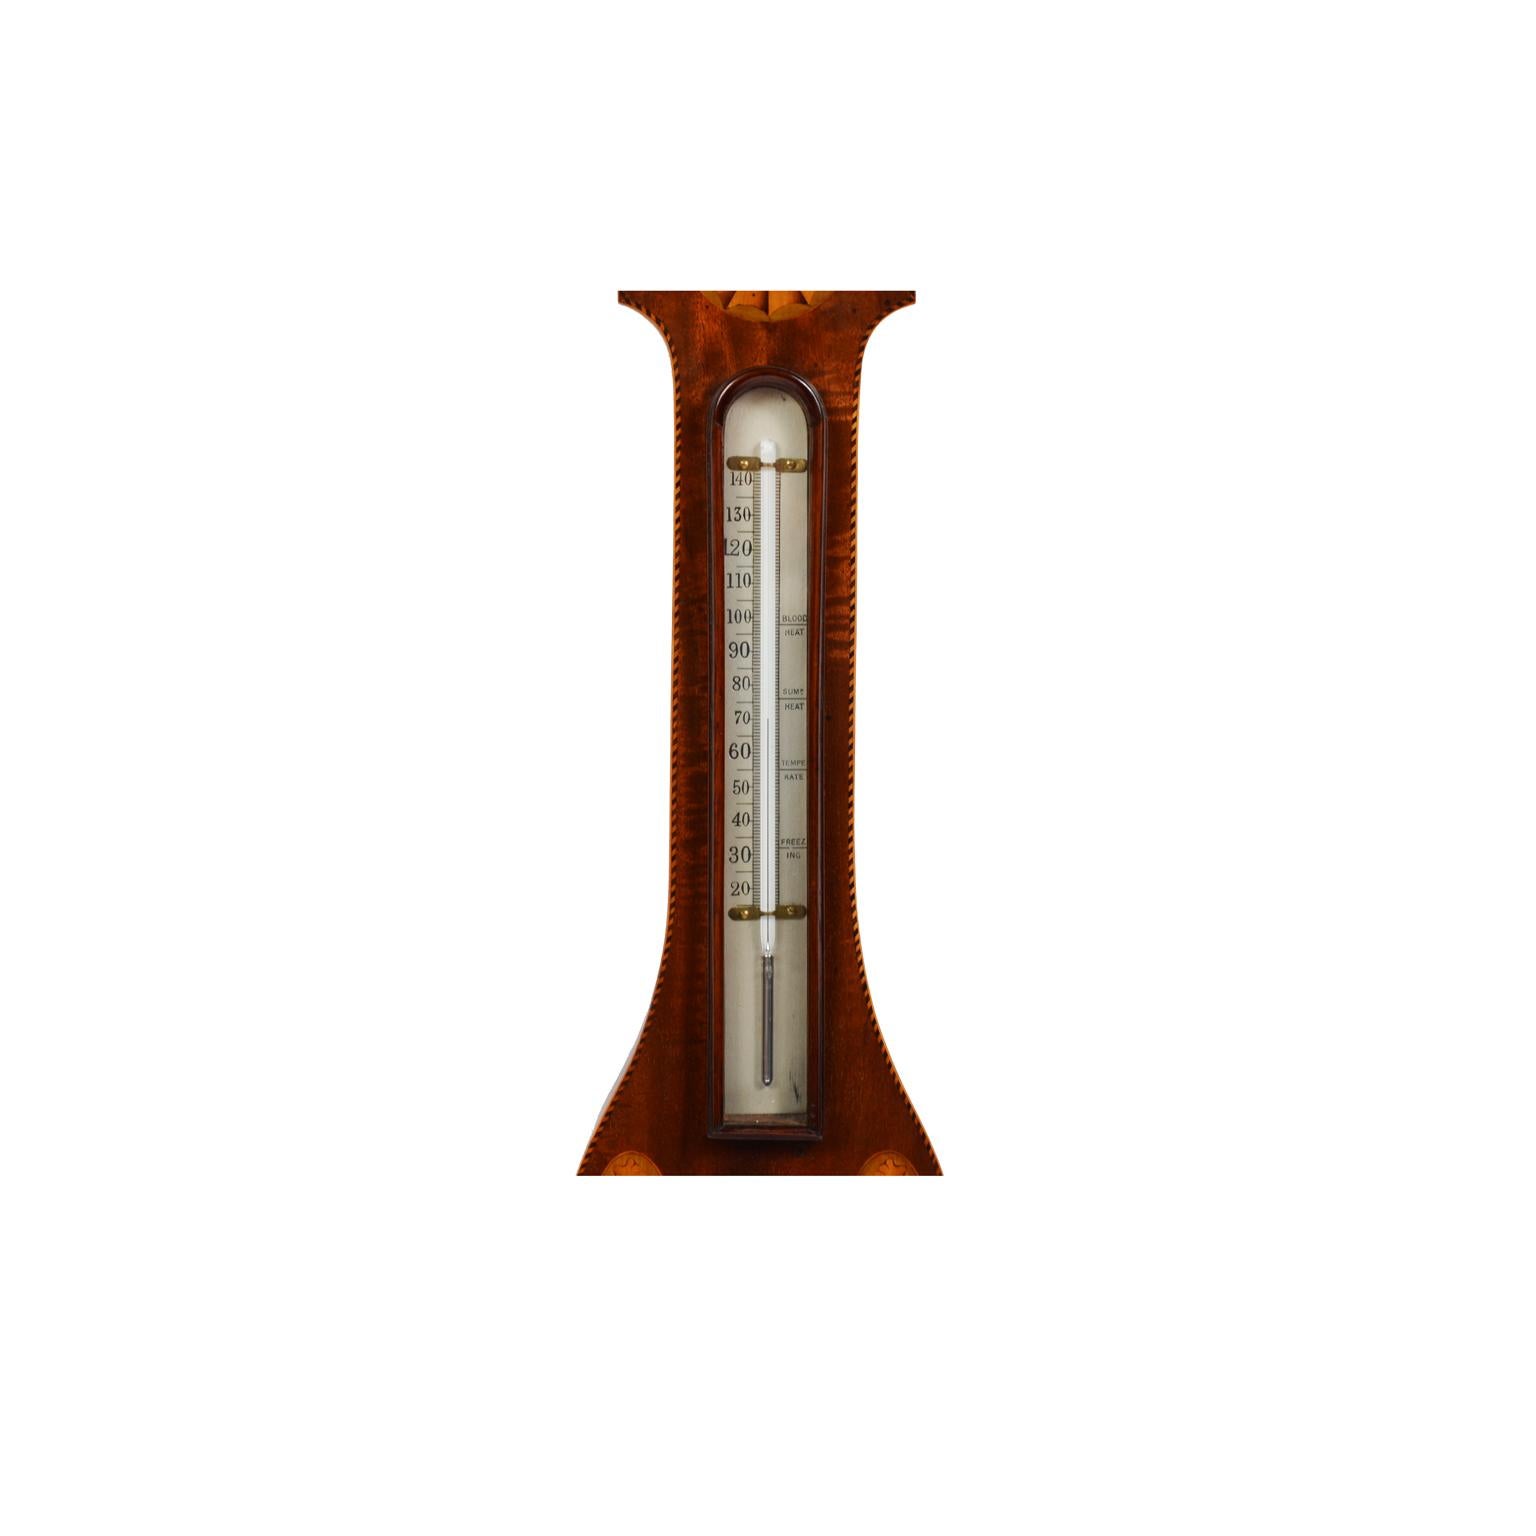 1930s Aneroid Mahogany Barometer Antique  Forecast Instrument Weather Measure 1